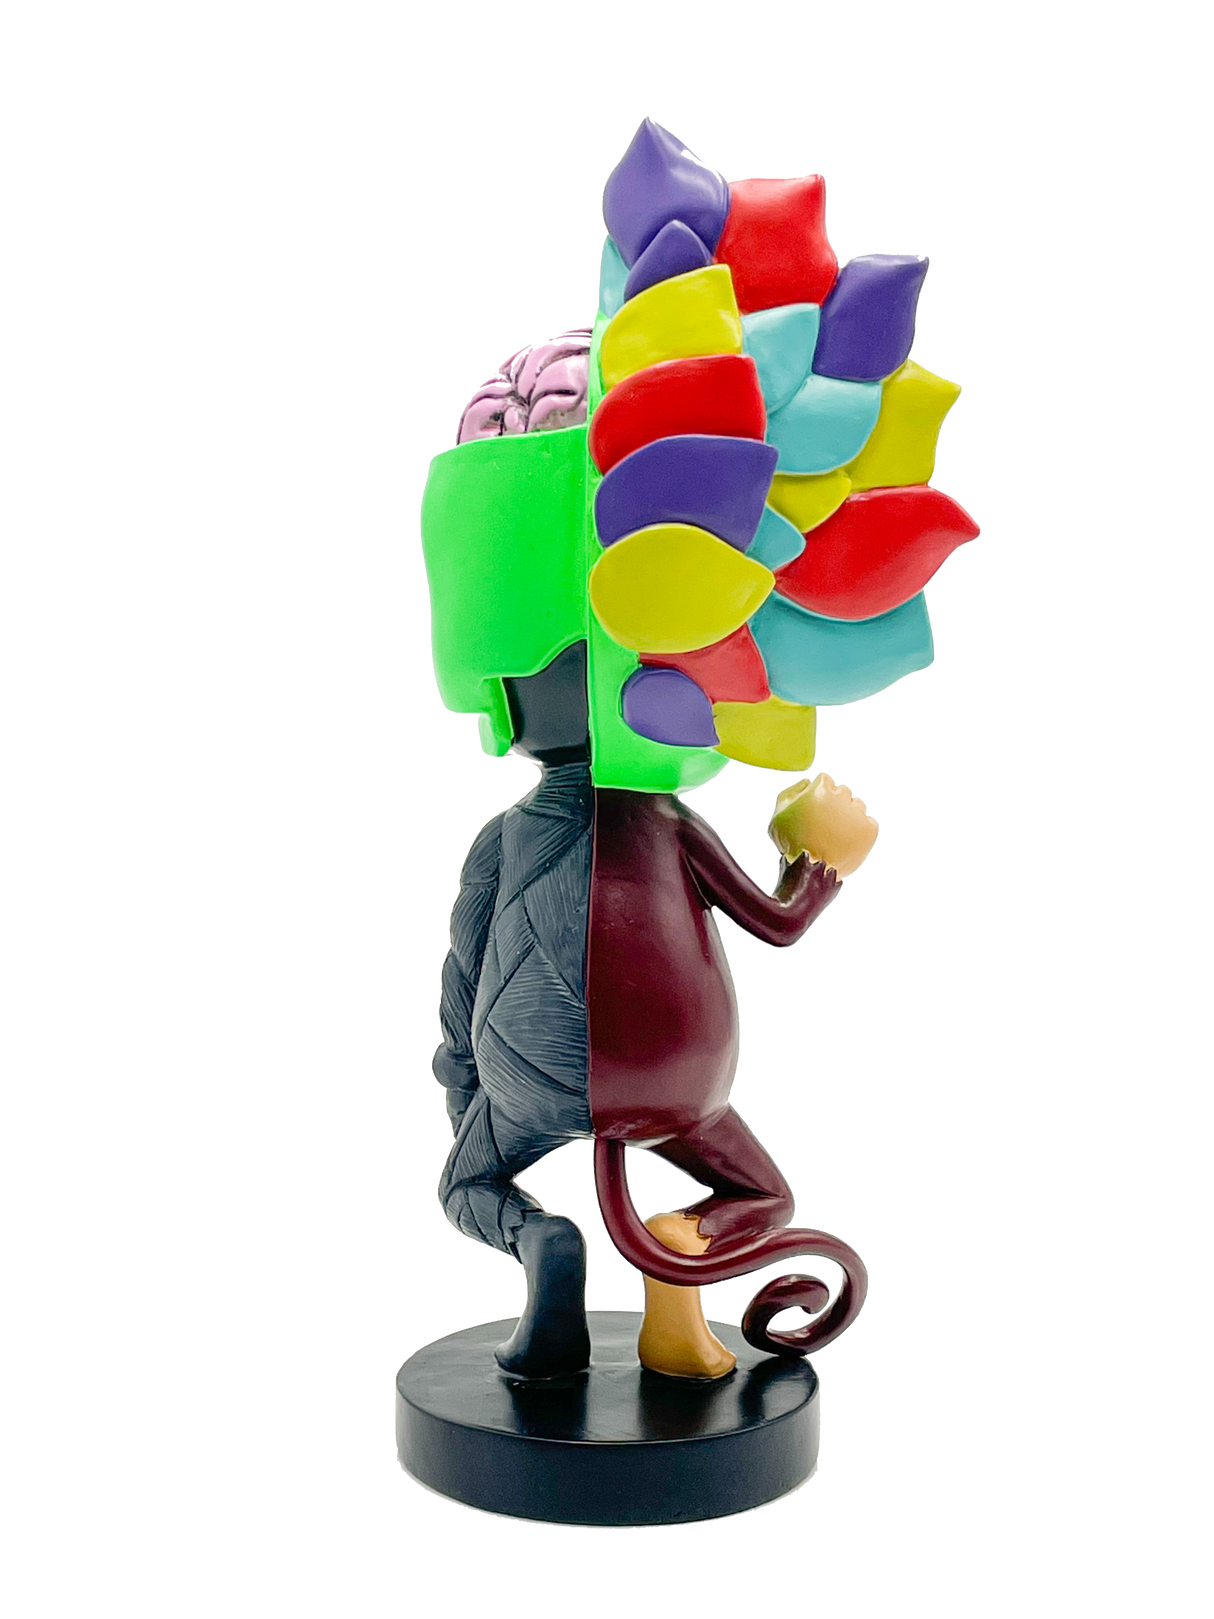 Limited Edition AFM Skeletal Figure - 12" Side View on Stand, Colorful Novelty Home Decor